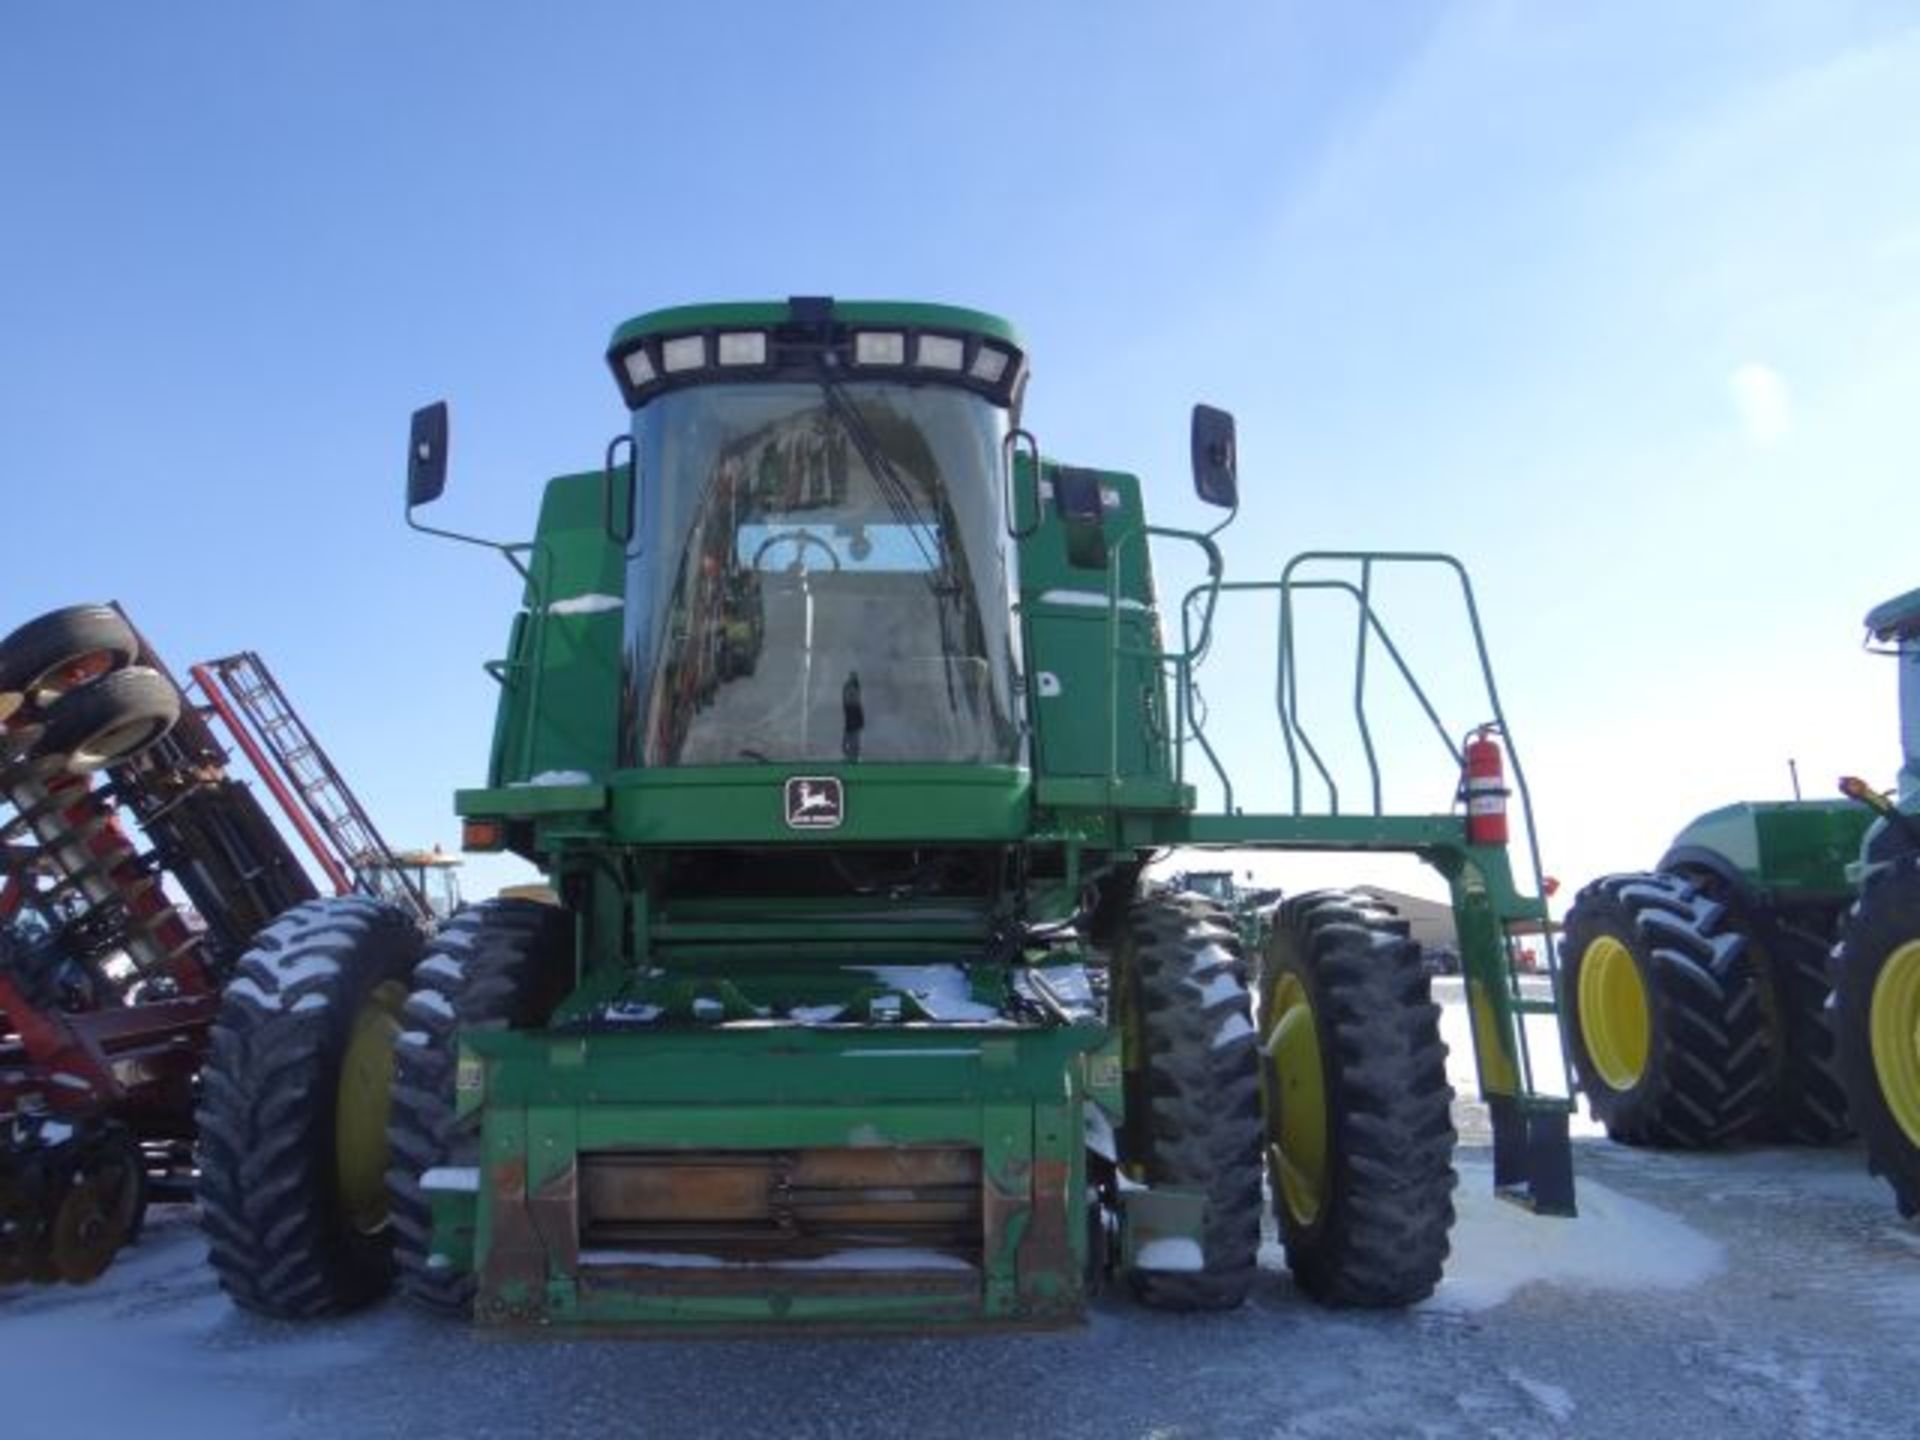 JD 9650STS Combine, 2001 #155342 Front tires Duals Goodyear 18.4x42. Rear 18.4x26. Aftermarket - Image 7 of 7